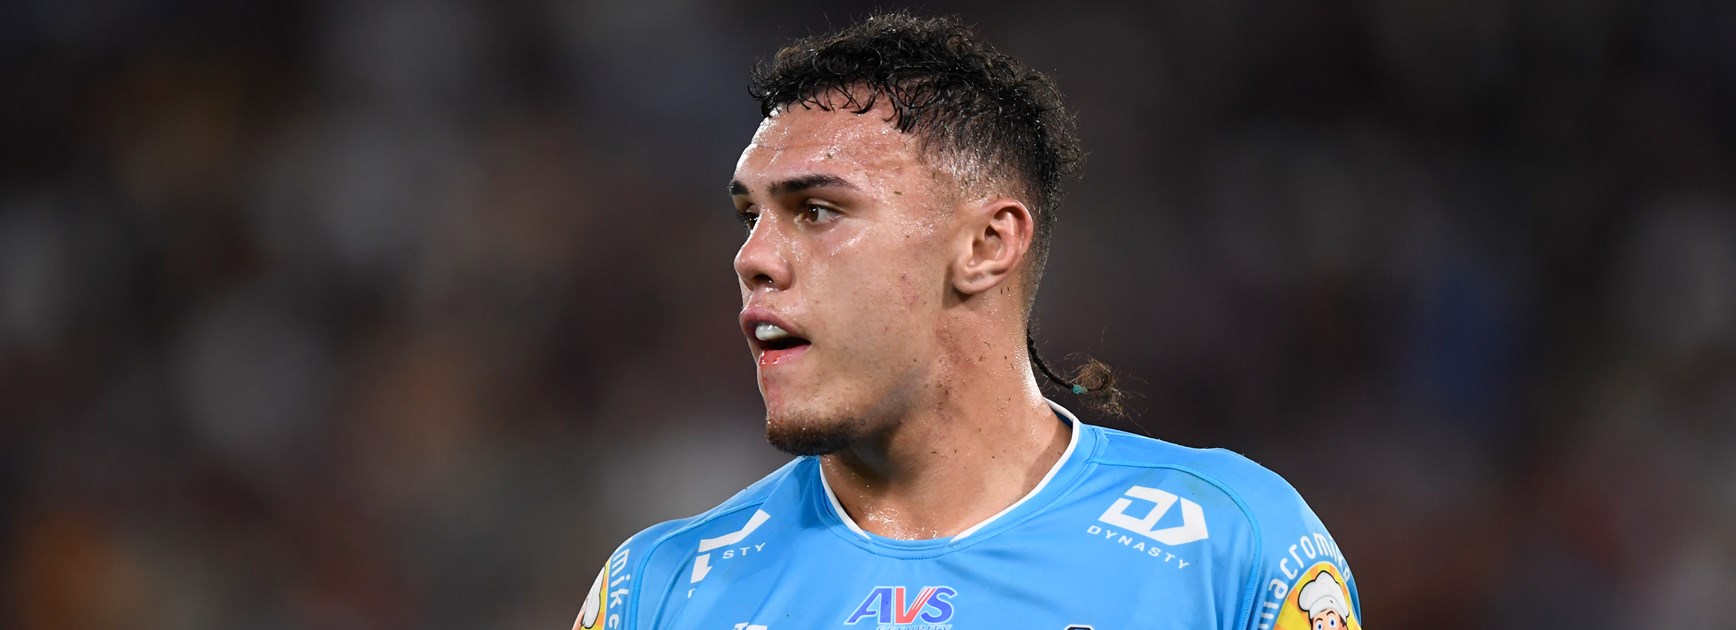 Locked in: Titans make forward pack switch ahead of derby